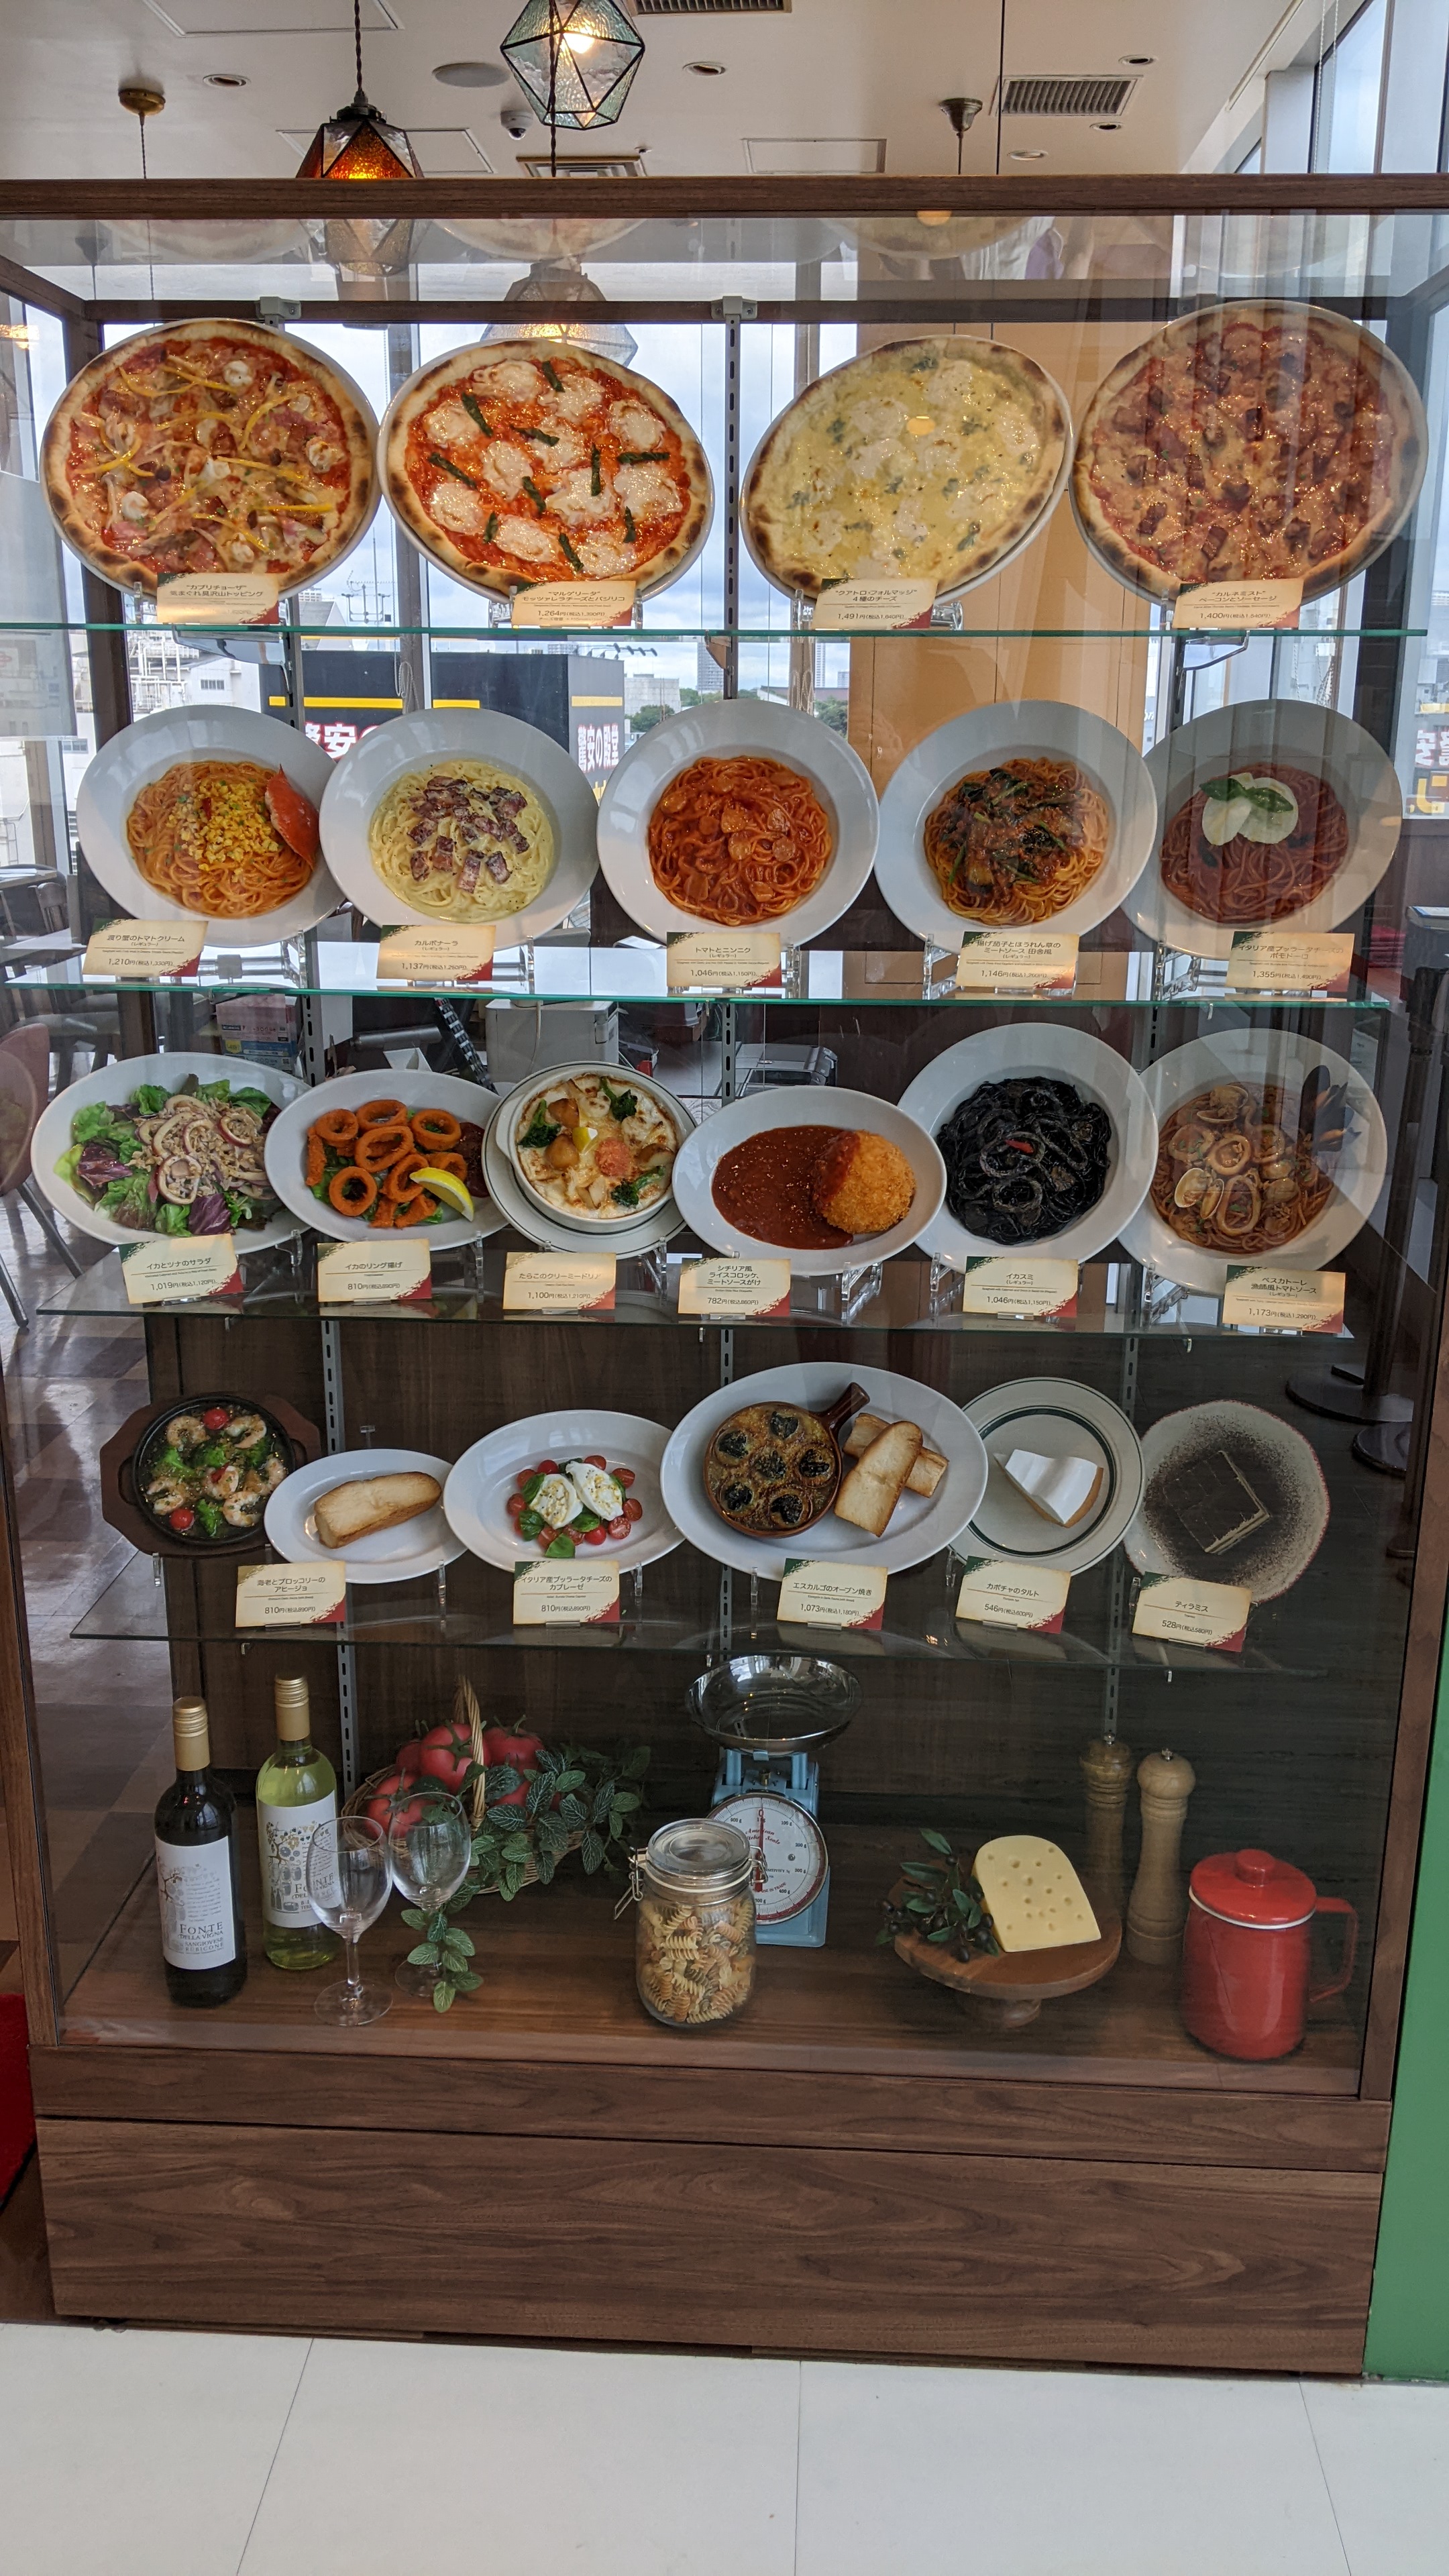 A display case of artificial food items of pizza and pasta